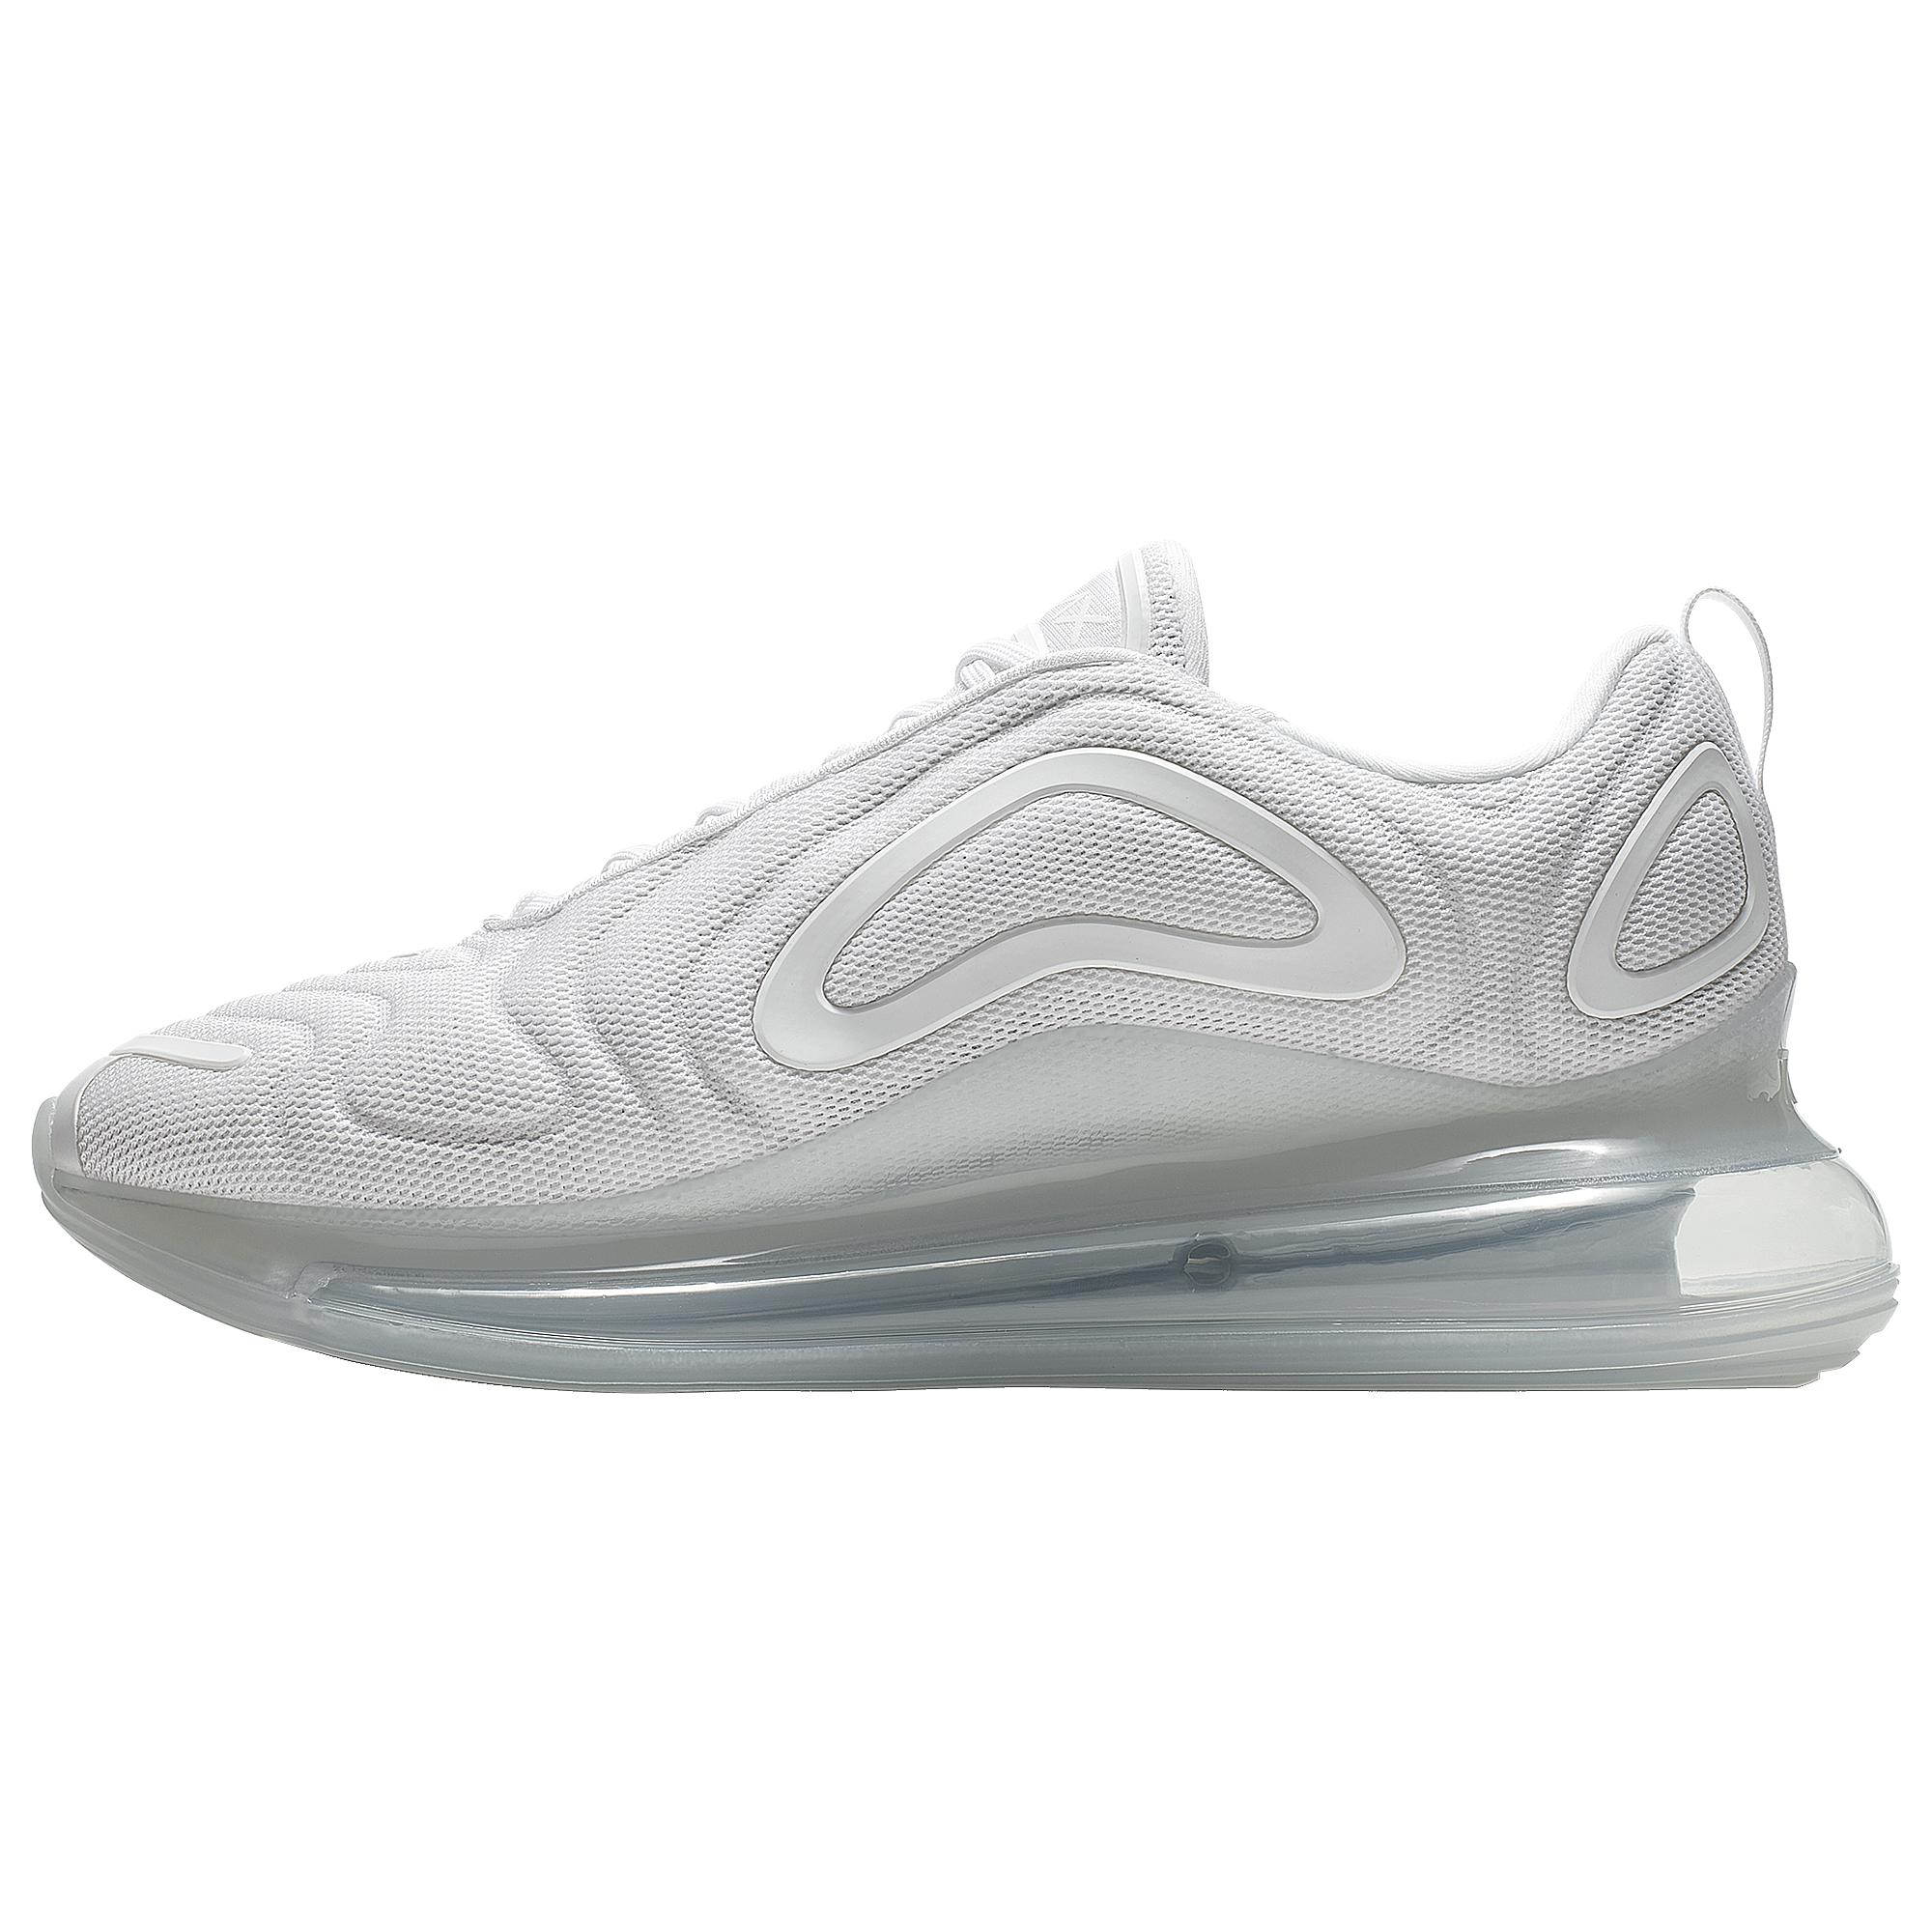 Nike Synthetic Air Max 720 - Shoes in White,Metallic Platinum,White (White)  for Men | Lyst